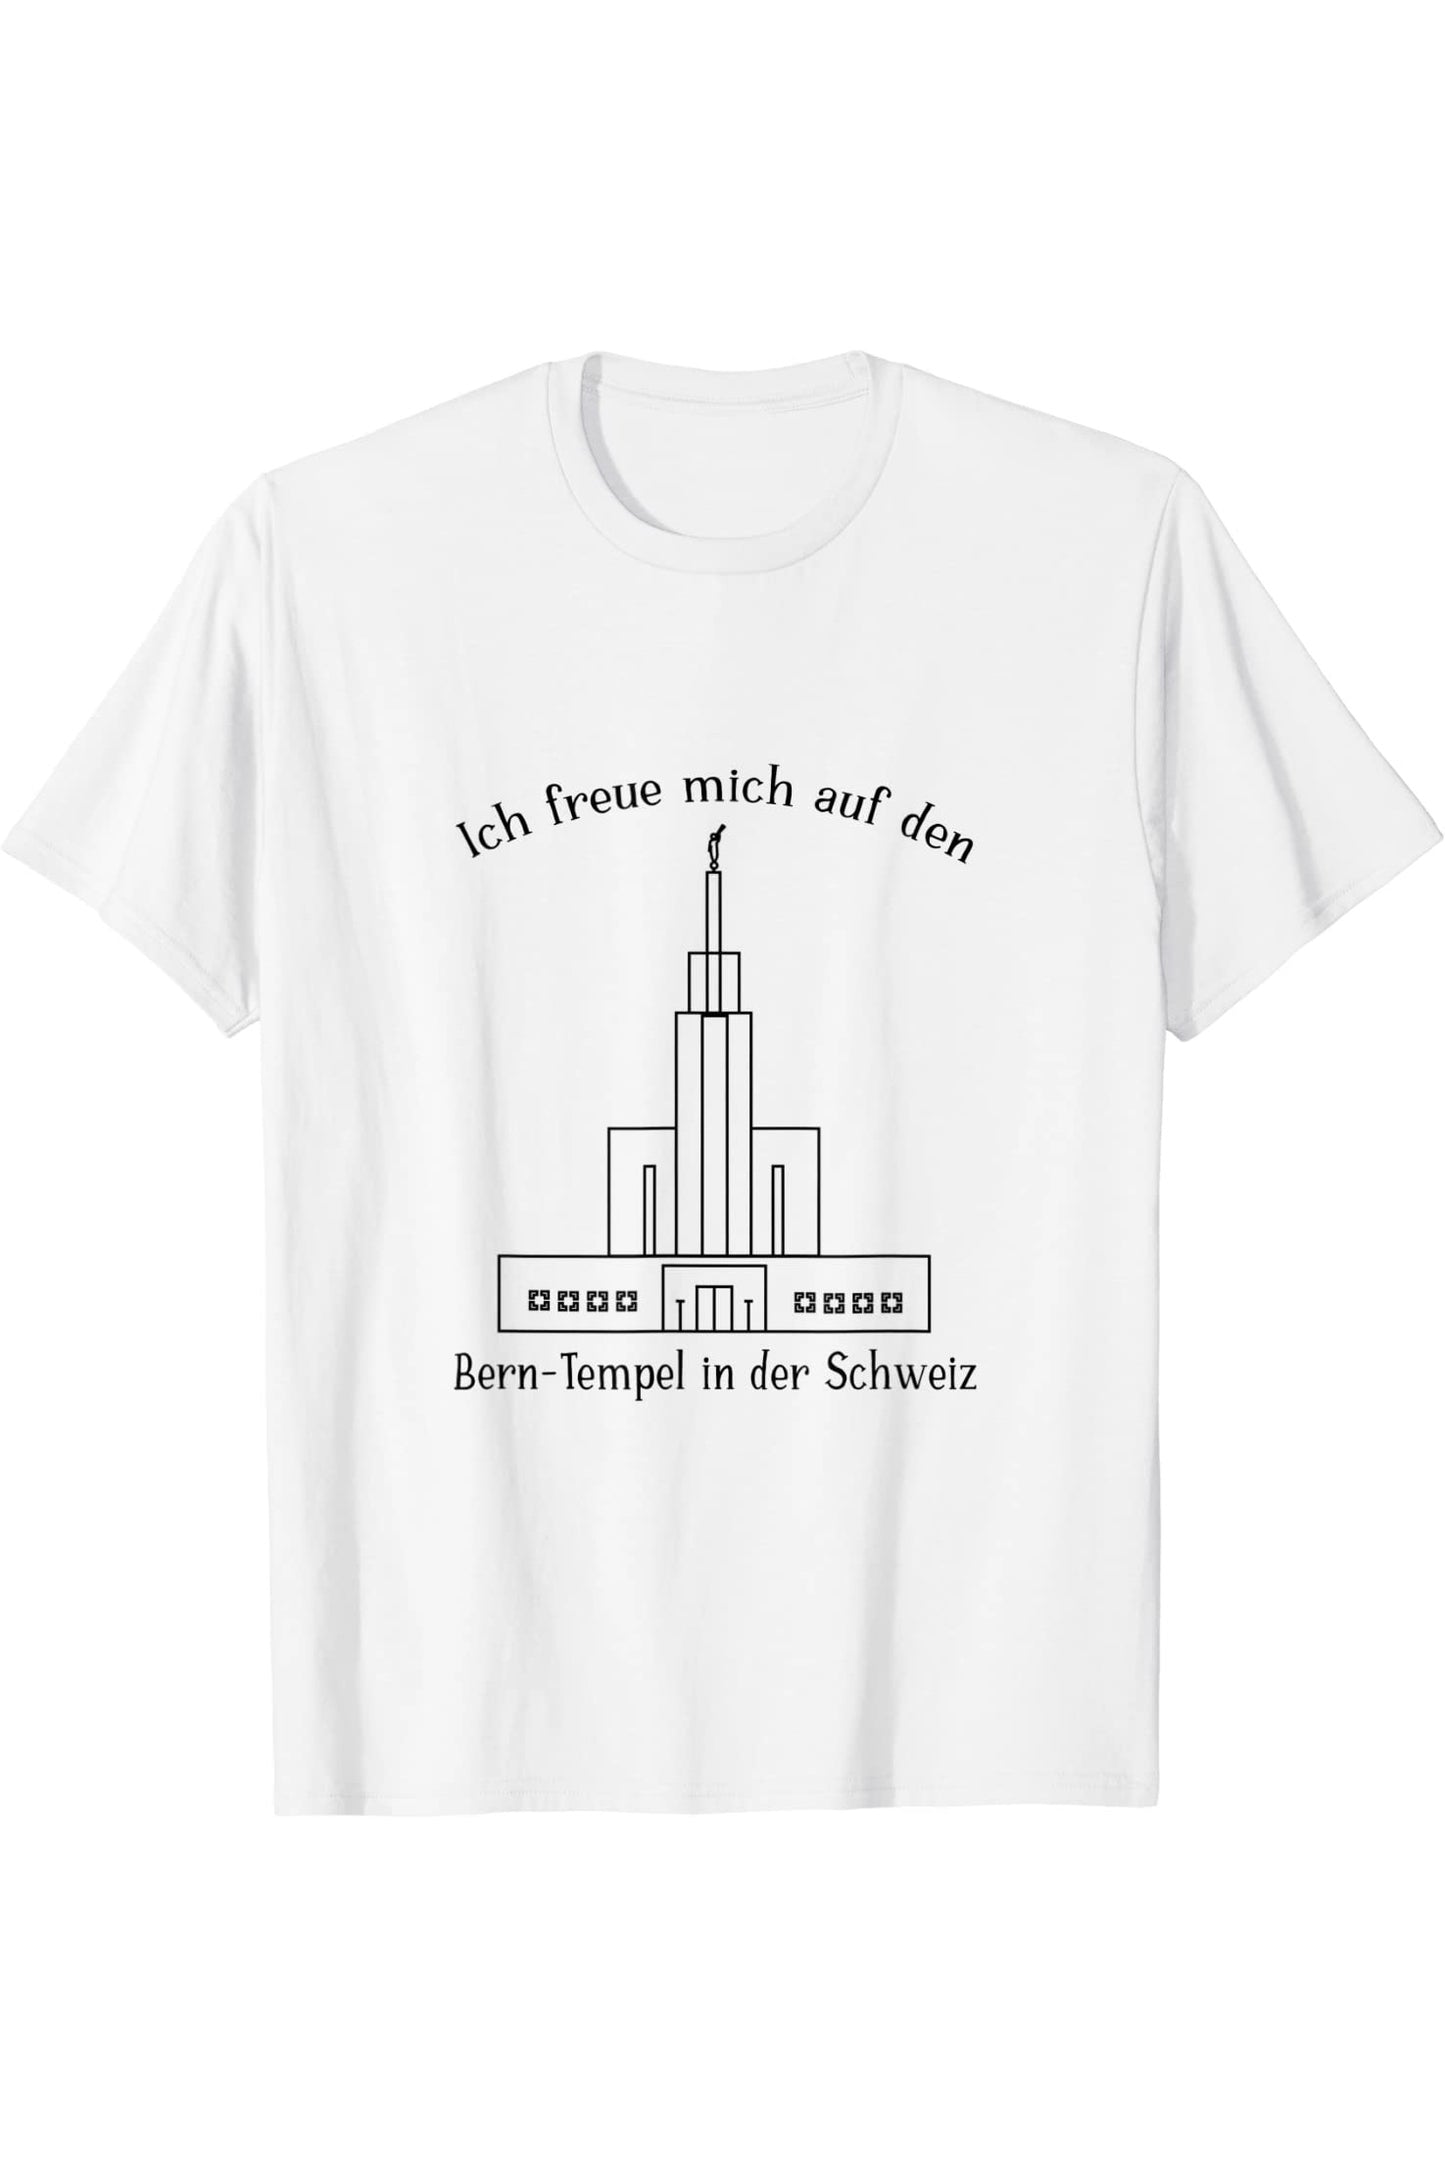 Bern Switzerland Temple, I love to see my temple (German) T-Shirt